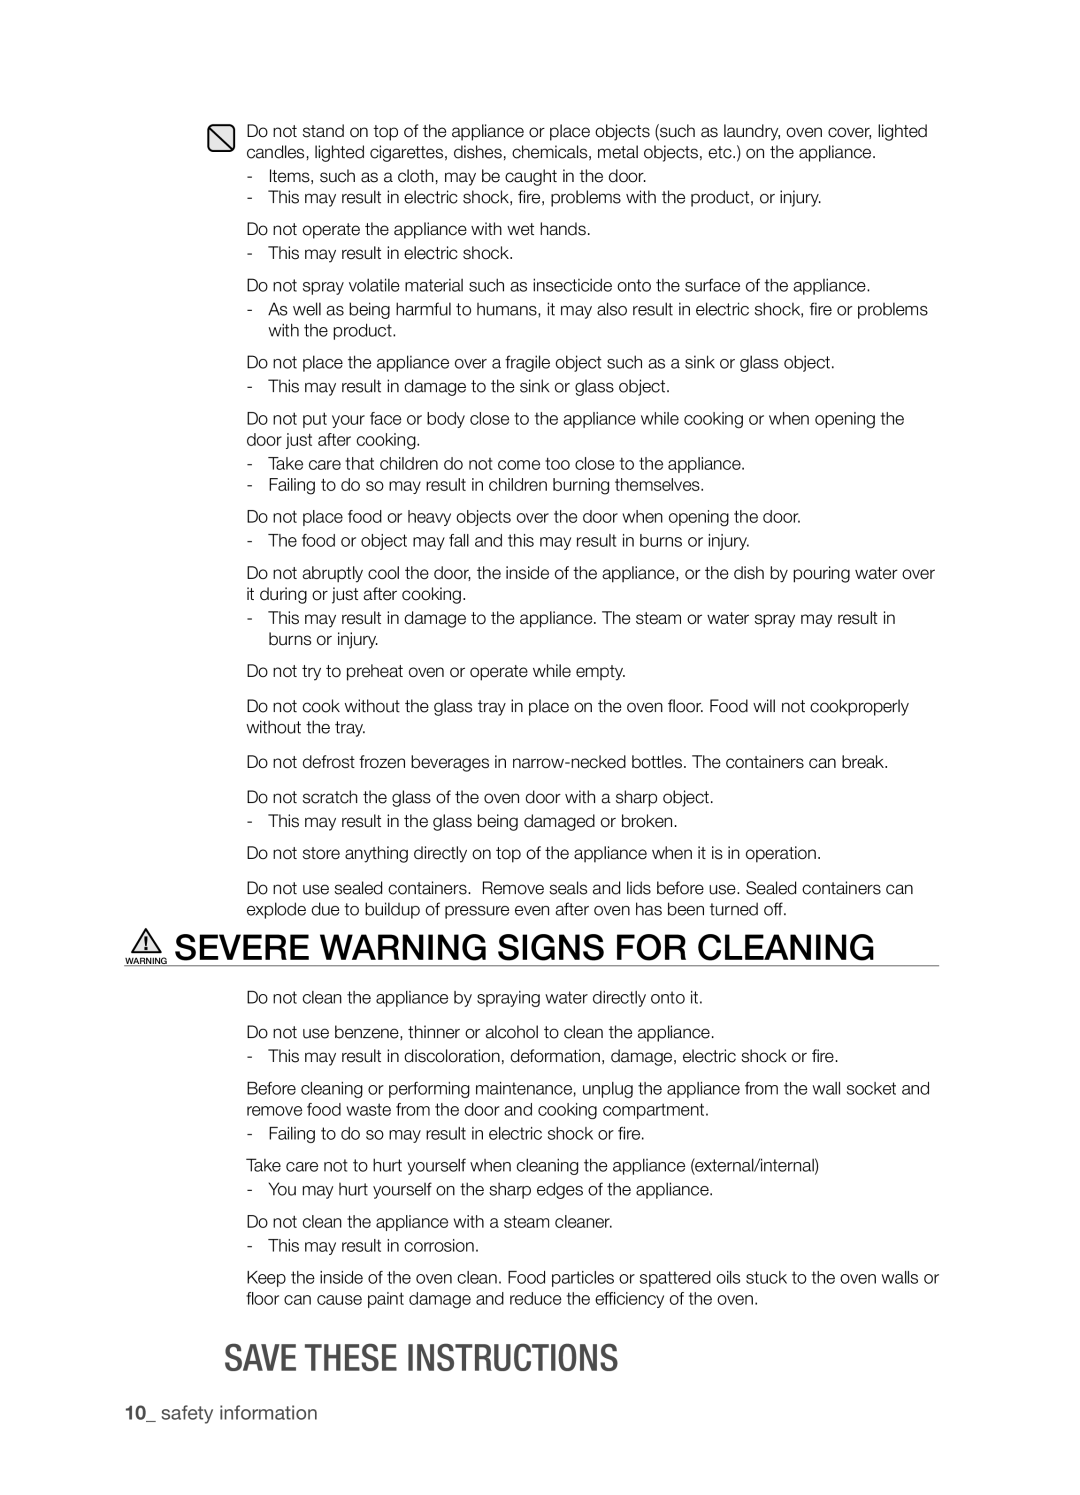 Samsung SMH8165STE user manual Warning Severe Warning Signs For Cleaning, Save these instructions, safety information 